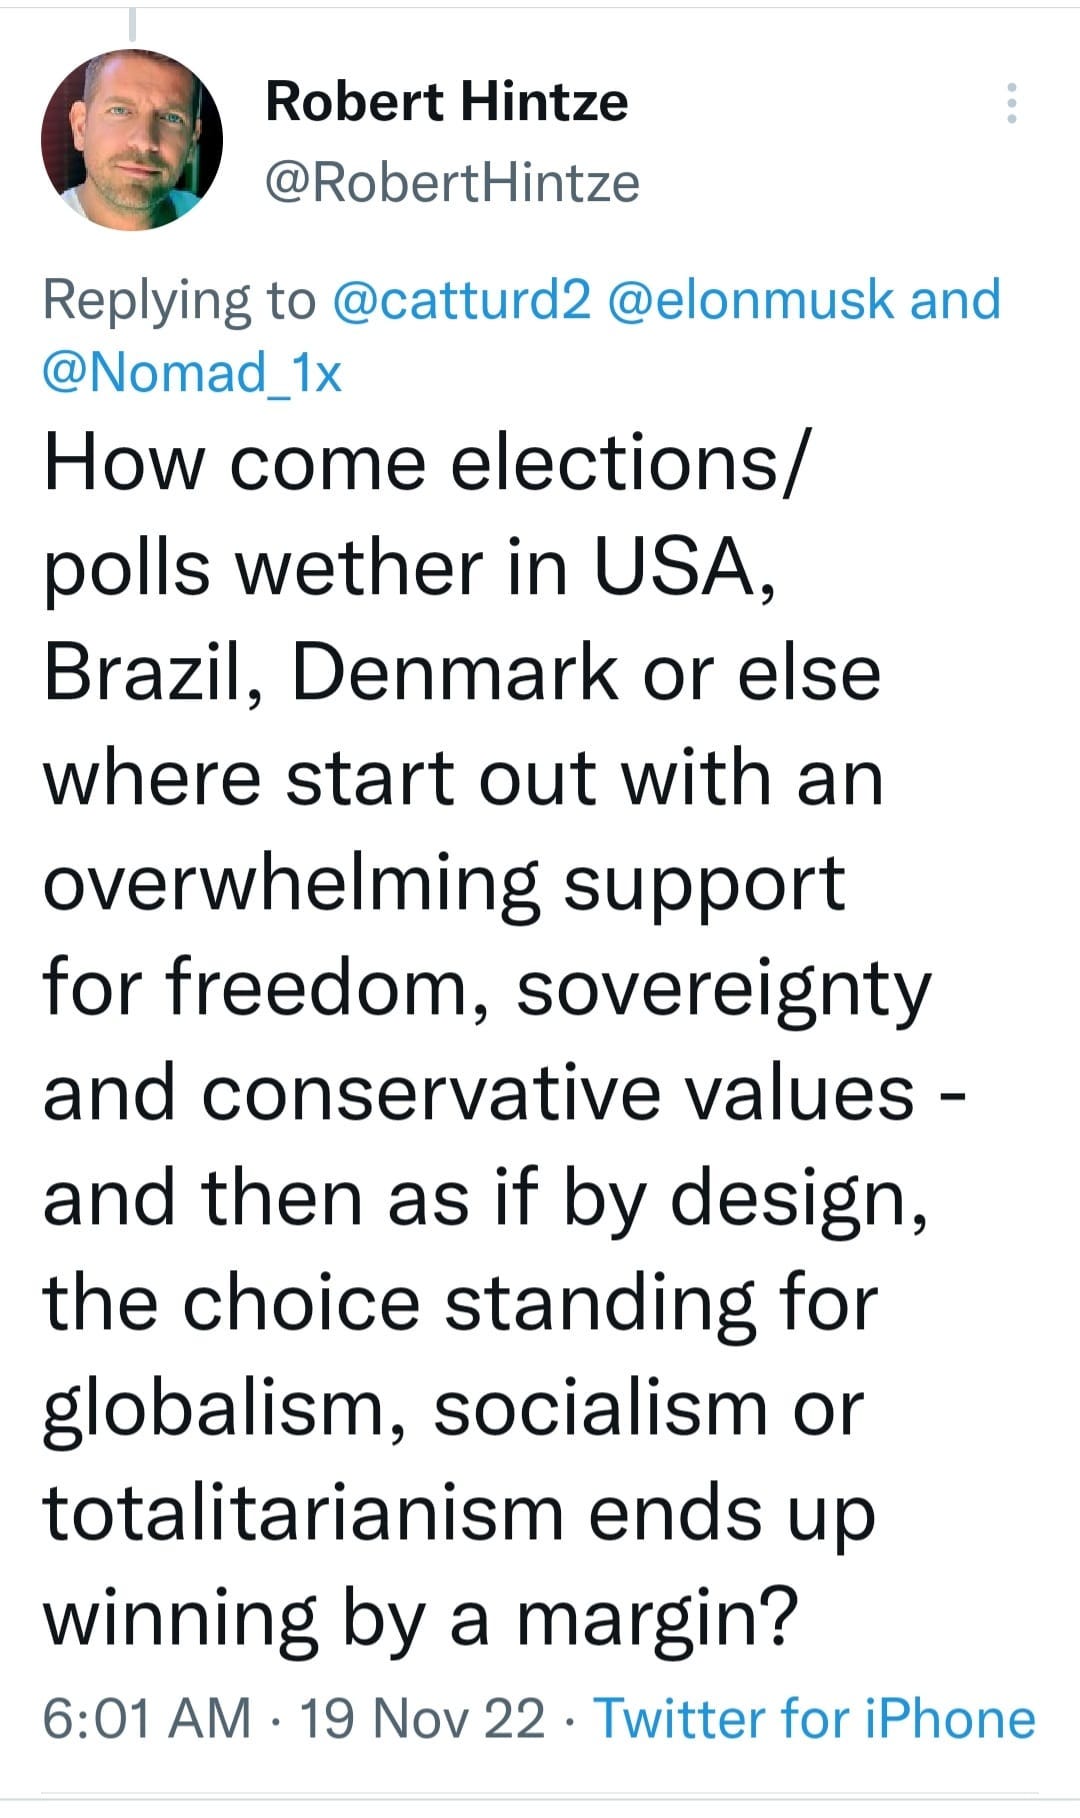 May be an image of 1 person and text that says 'Robert Hintze @RobertHintze Replying to @catturd2 @elonmusk and @Nomad_1x How come elections/ polls wether in USA, Brazil, Denmark or else where start out with an overwhelming support for freedom, sovereignty and conservative values- and then as if by design, the choice standing for globalism, socialism or totalitarianism ends up up winning by a margin? 6:01 AM 19 Nov 22 Twitter for iPhone'